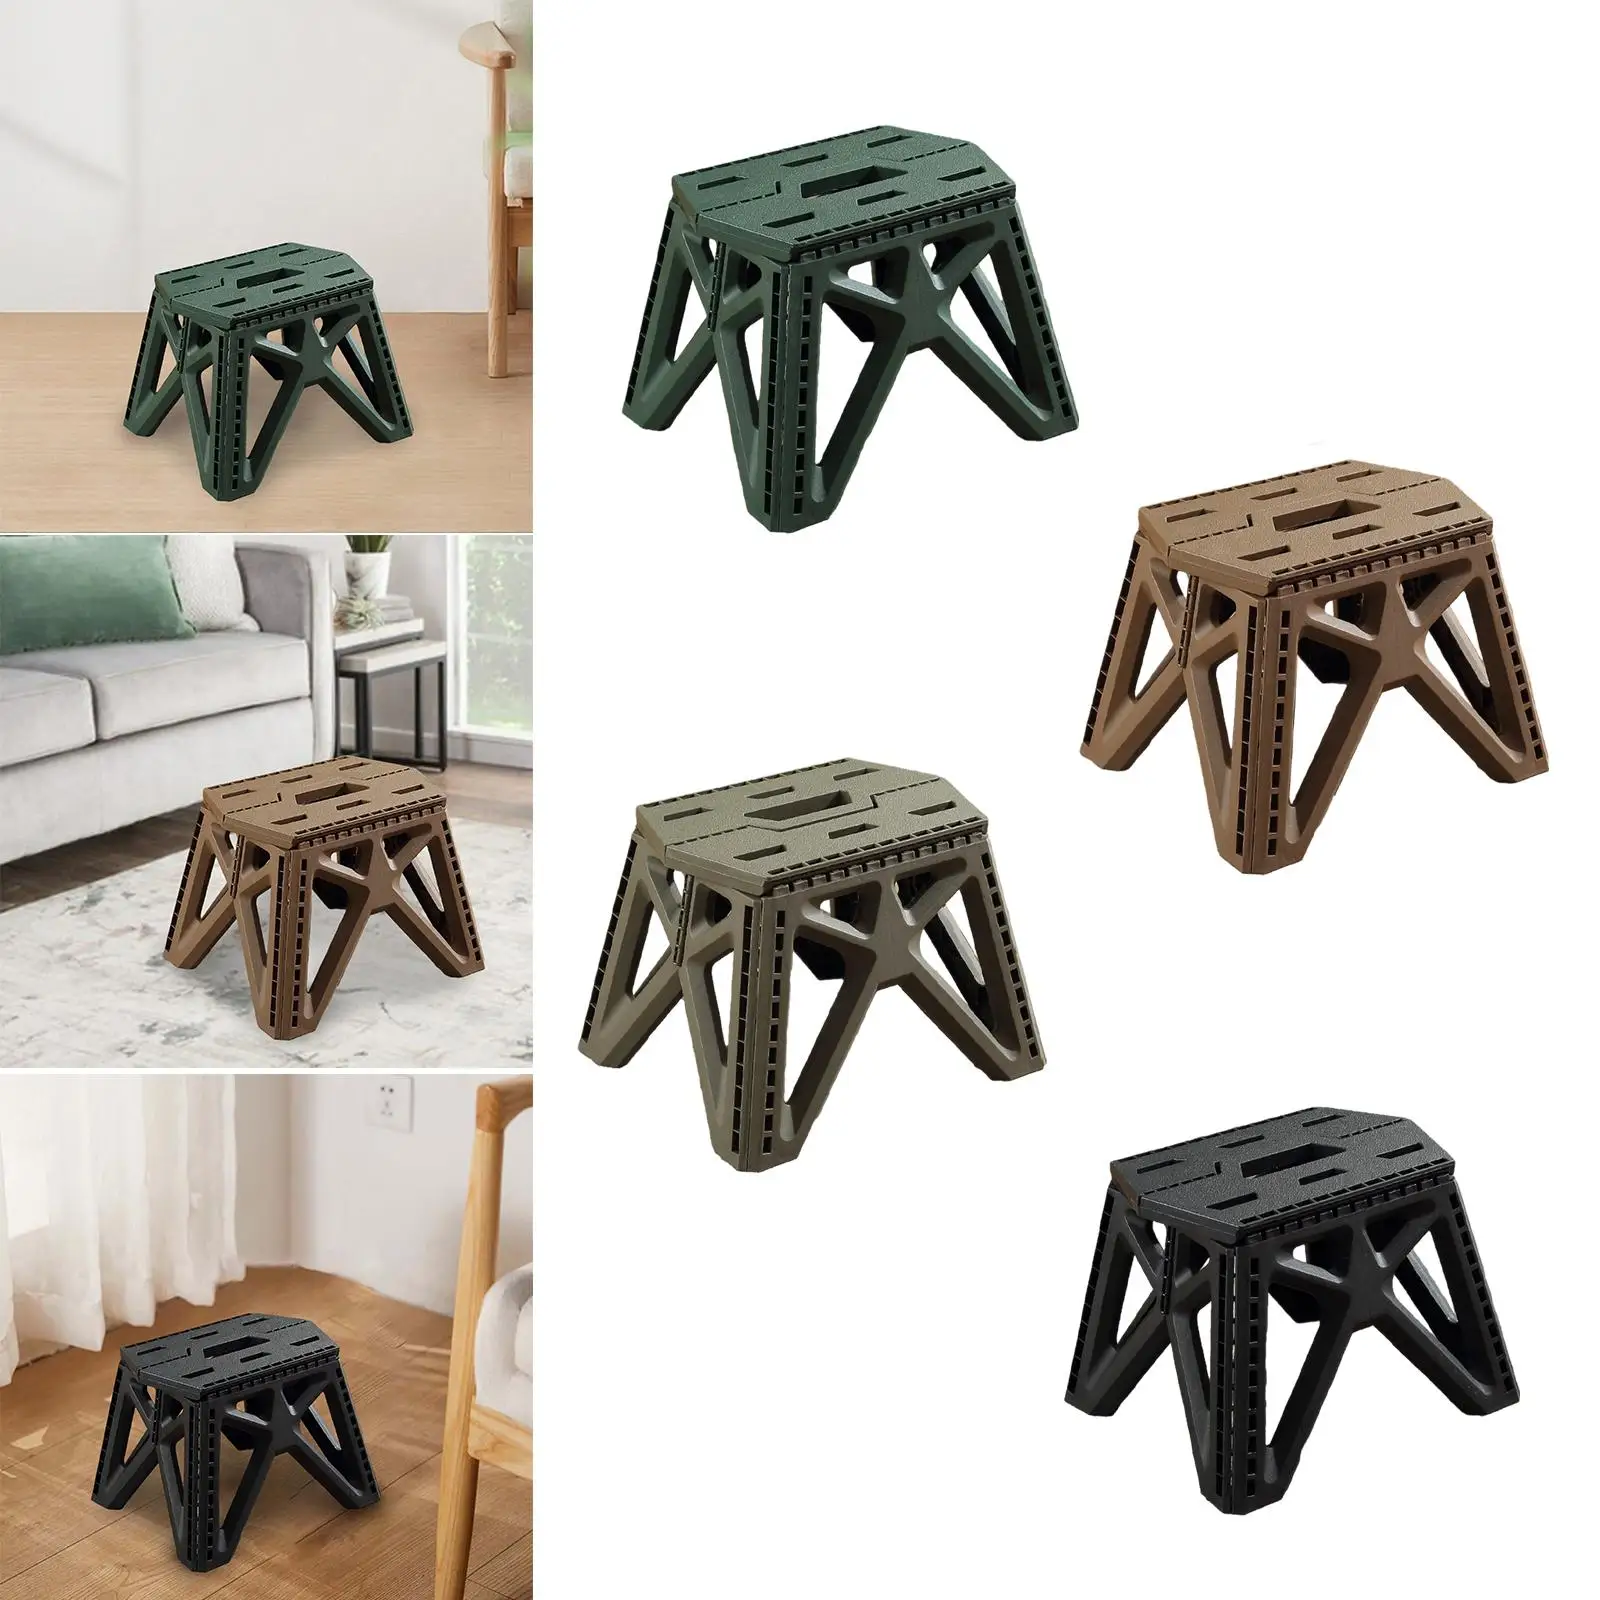 Foldable Camping Stool Portable Foldable Stool for Backpacking Picnic Hiking